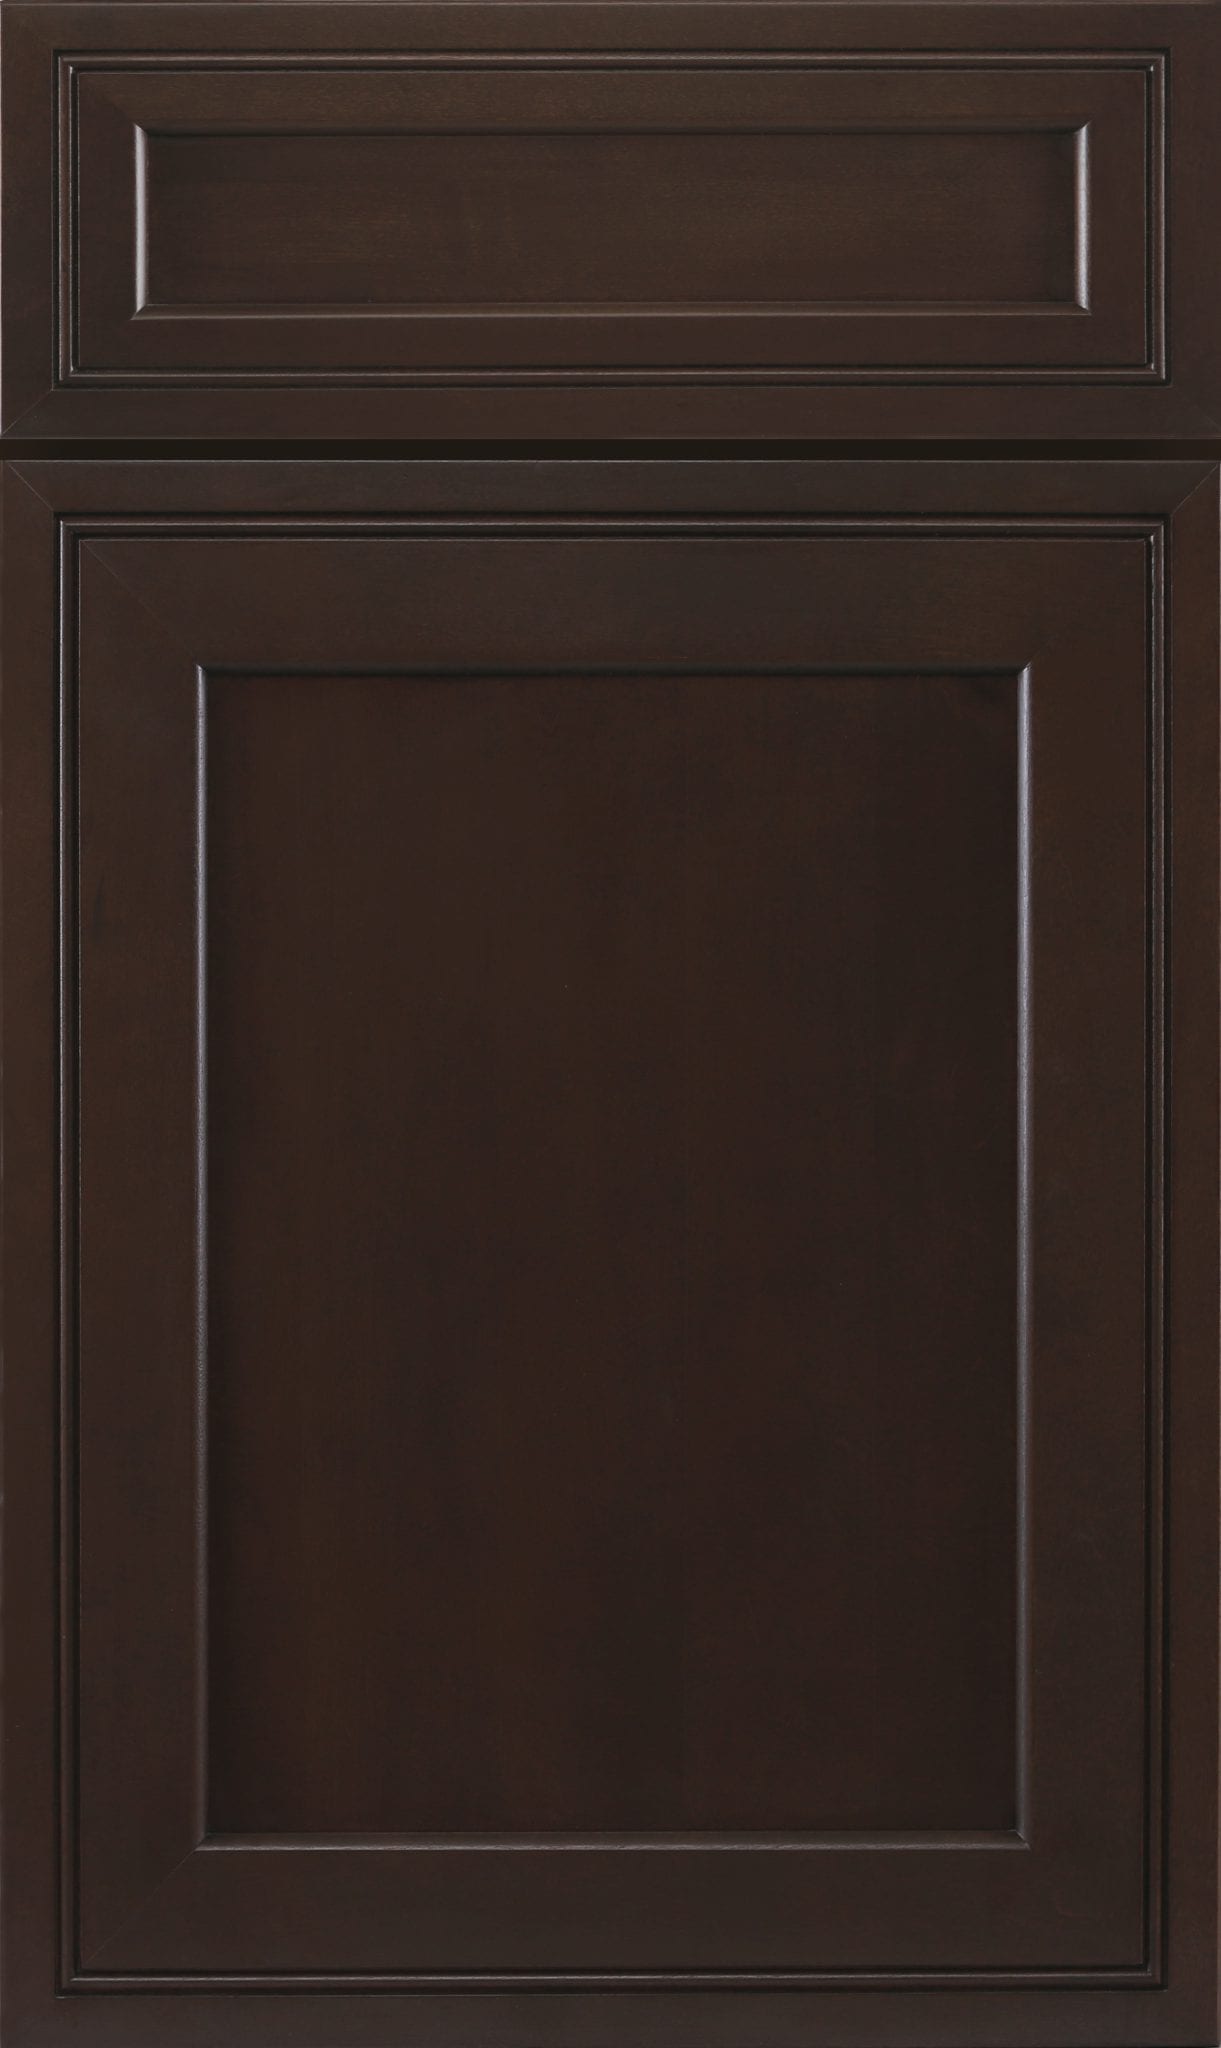 H3 - Chestnut Cabinetry